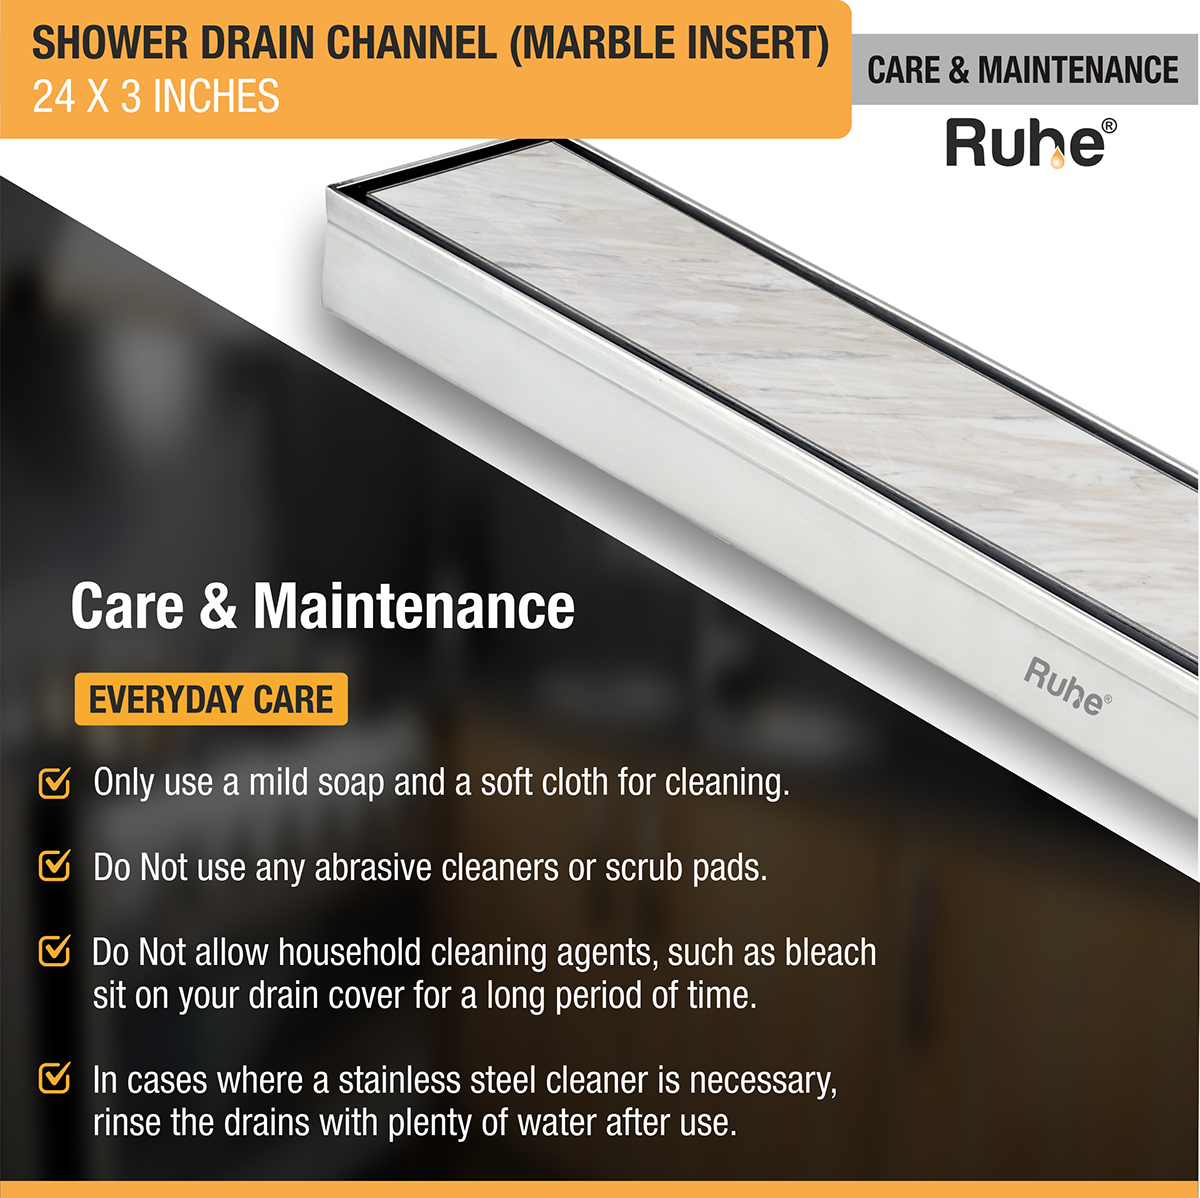 Marble Insert Shower Drain Channel (24 x 3 Inches) with Cockroach Trap (304 Grade) care and maintenance